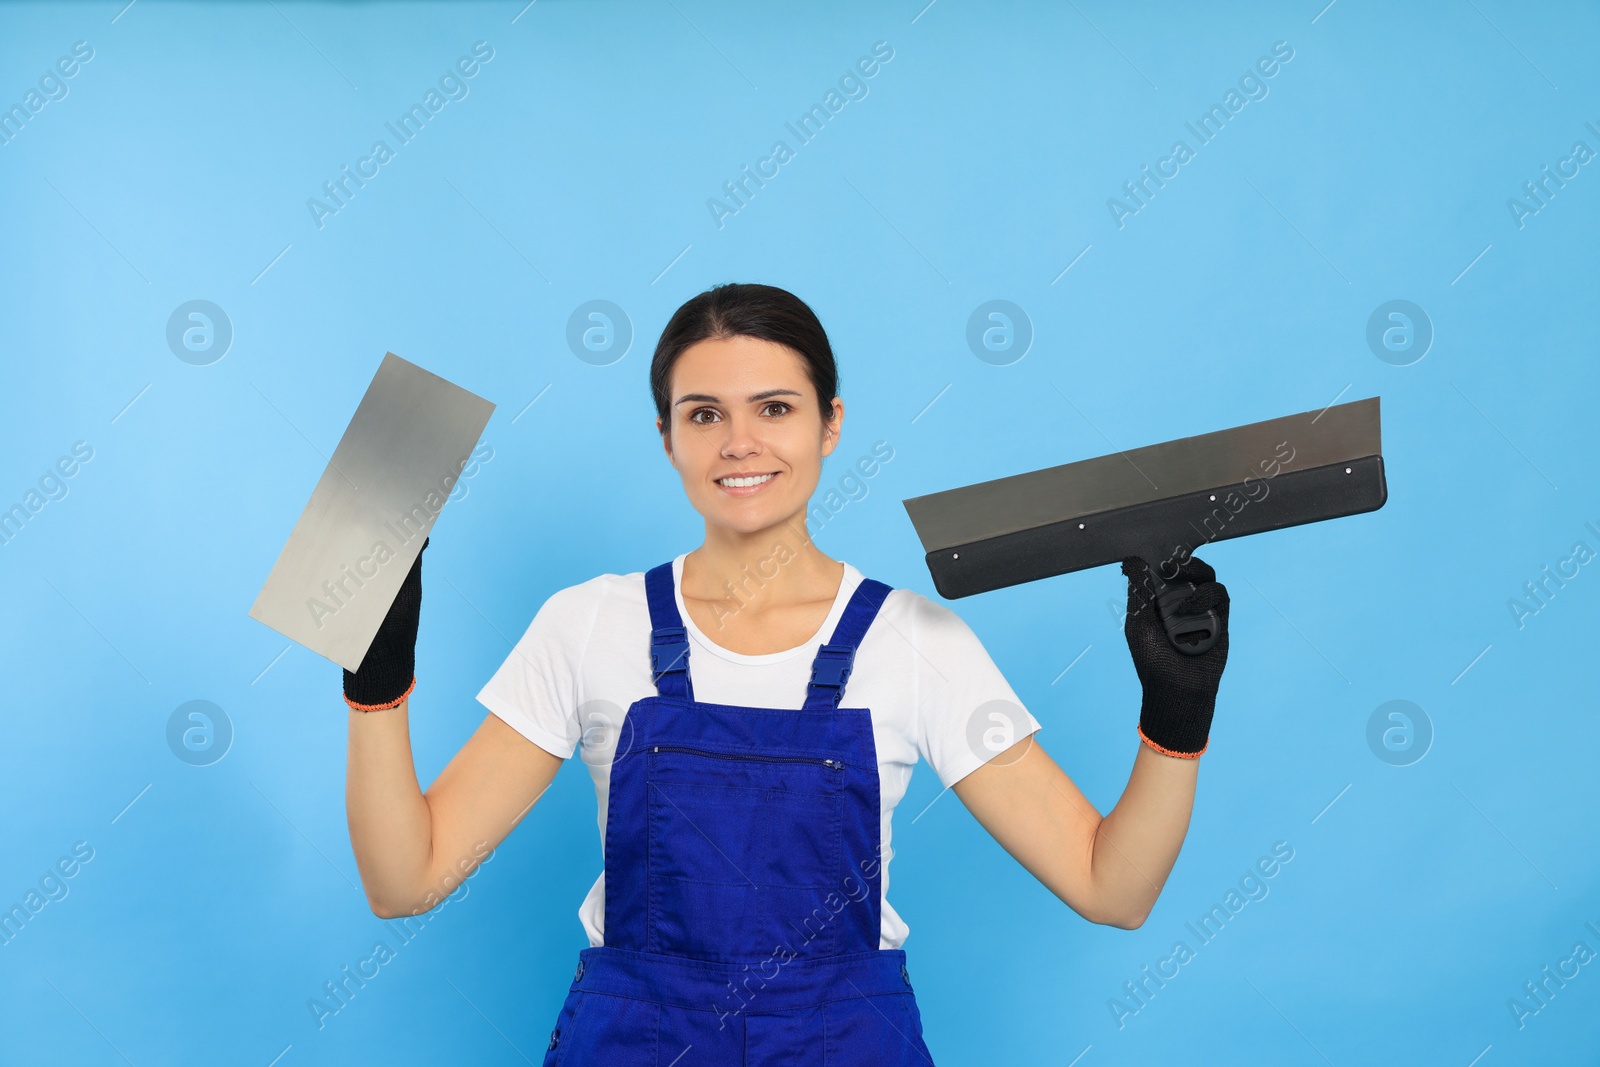 Photo of Professional worker with putty knives on light blue background